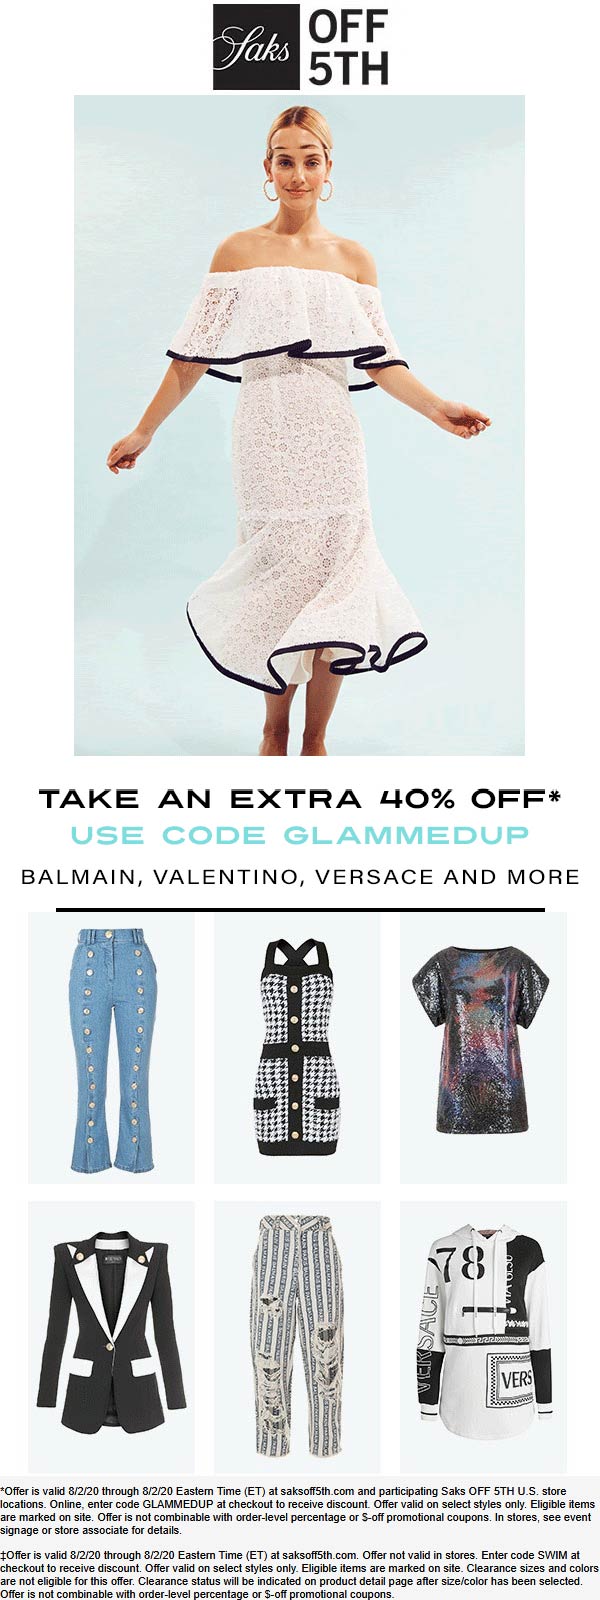 OFF 5TH stores Coupon  Extra 40% off Balmain Valentino Versace & more today at Saks OFF 5TH via promo code GLAMMEDUP #off5th 